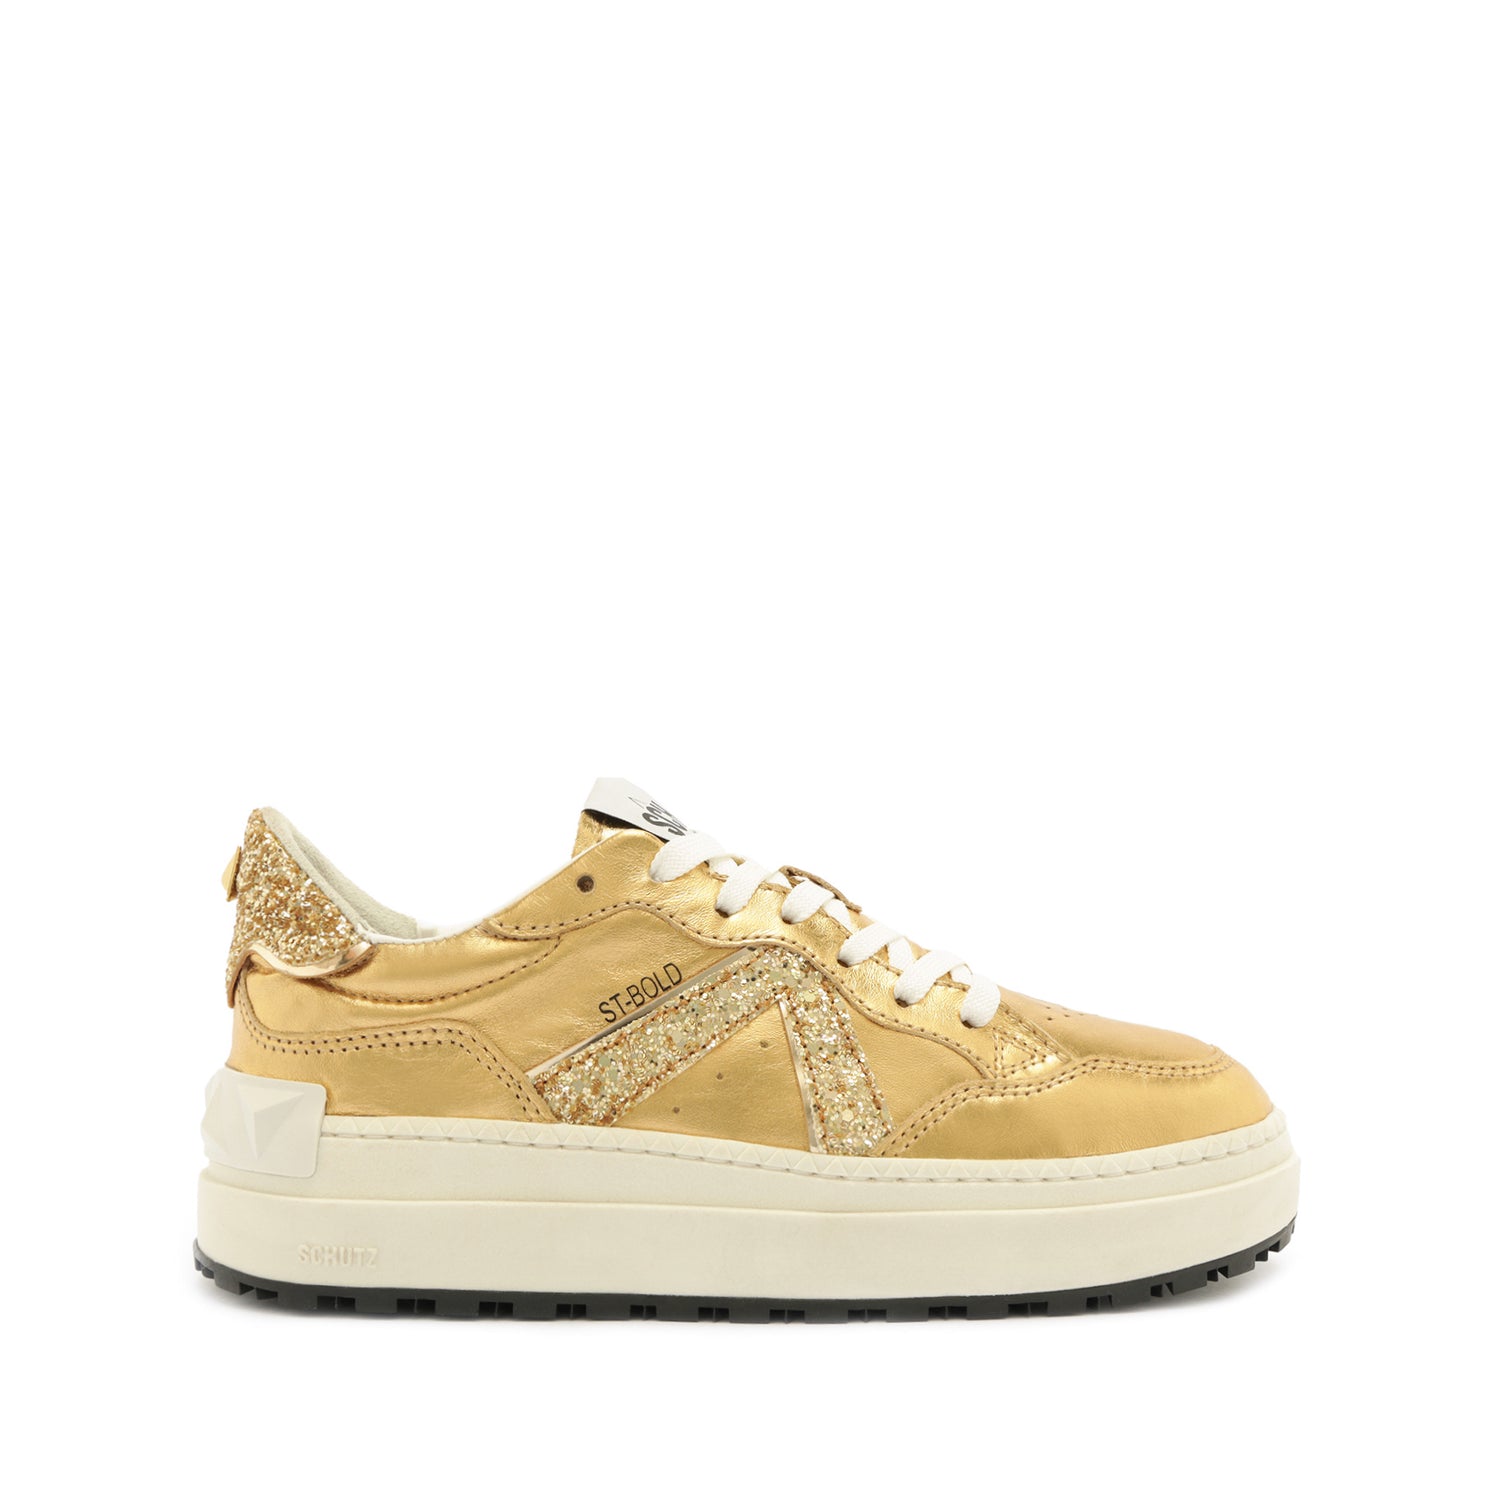 ST-BOLD Leather Sneaker Sneakers FALL 23 5 Gold Calf Leather - Schutz Shoes